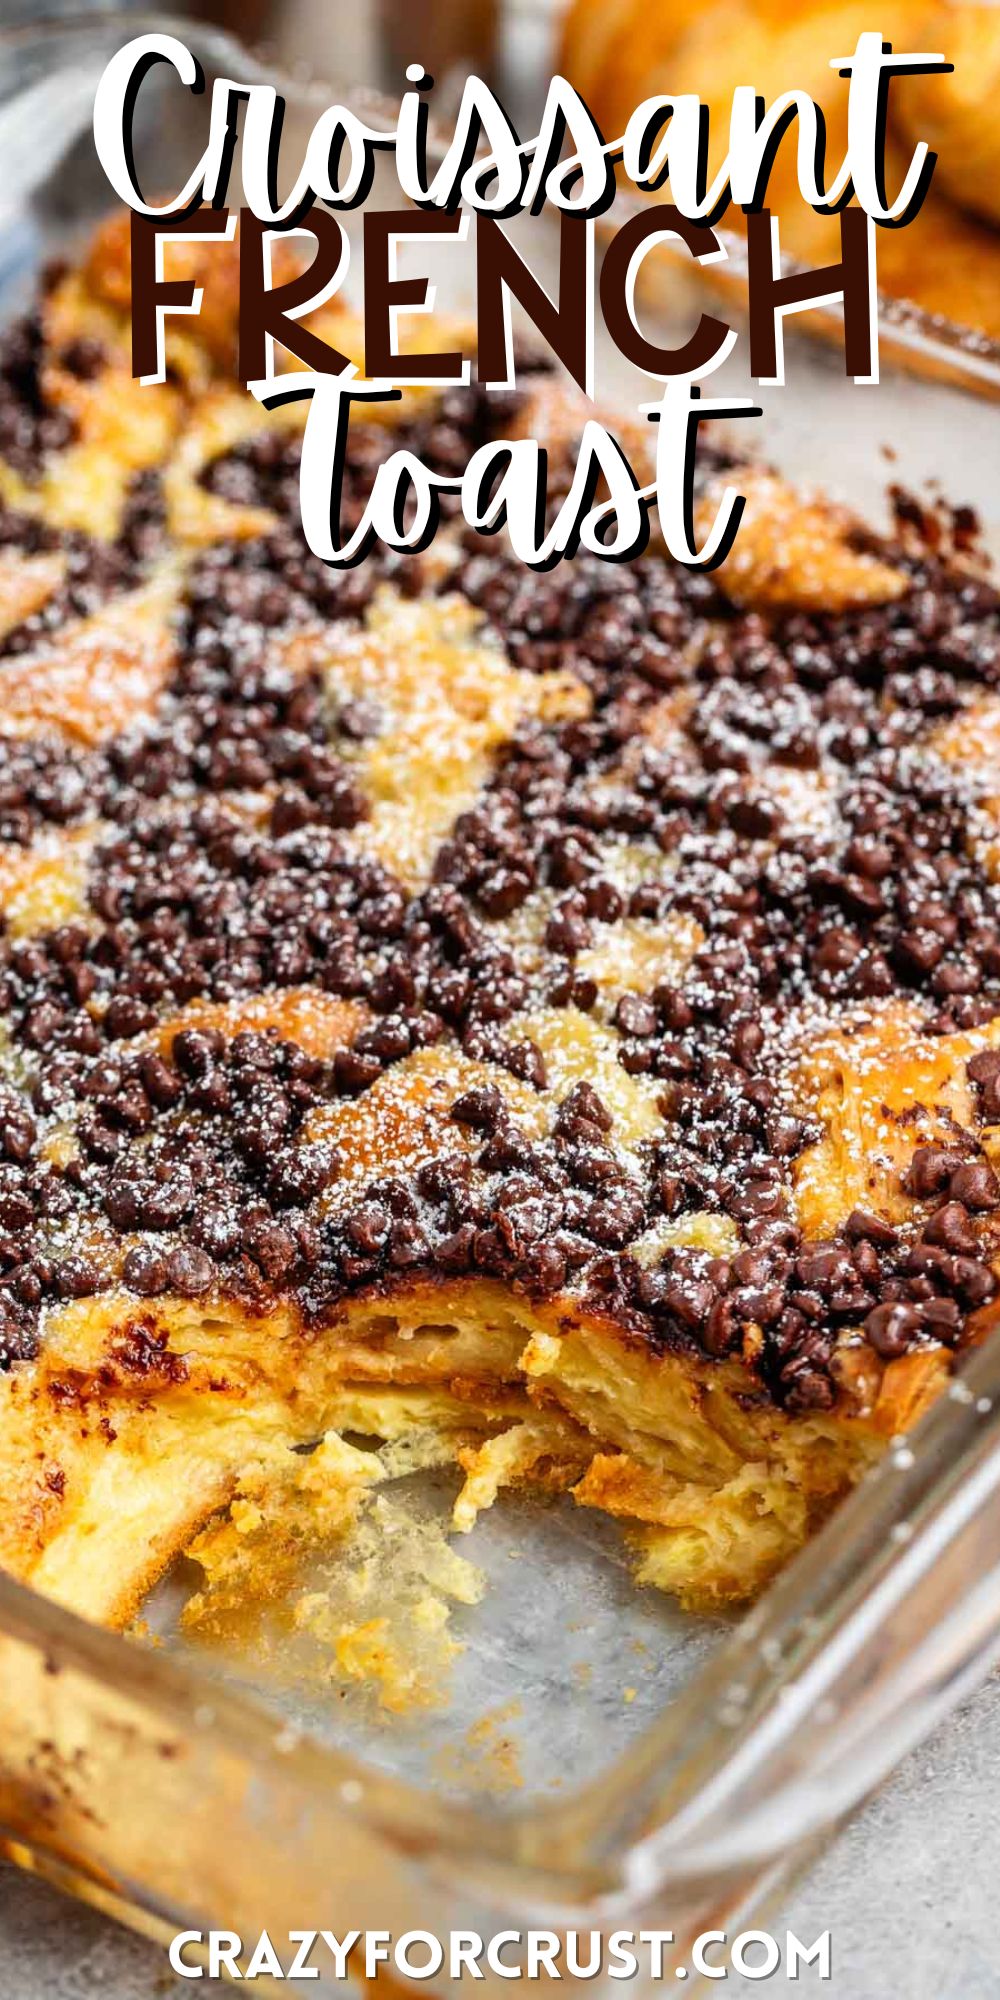 French toast in a square clear pan with chocolate chips and powdered sugar sprinkled on top with words on the image.